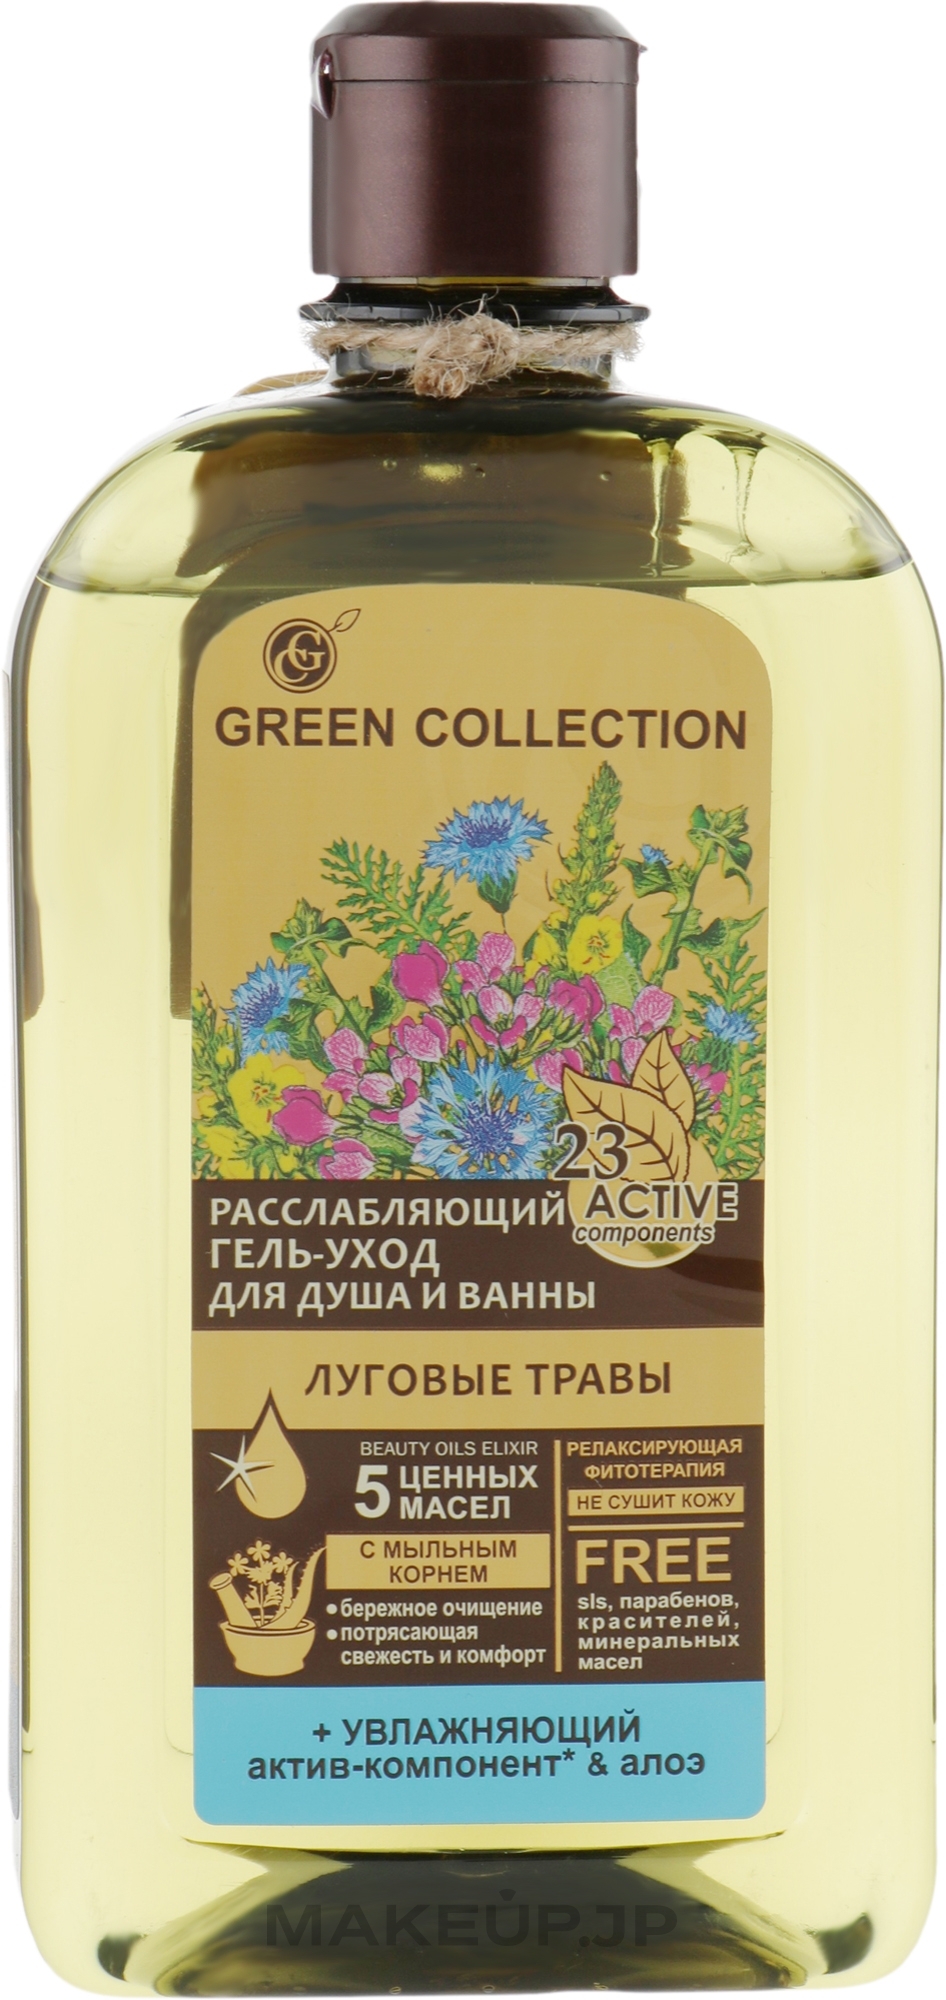 Relaxing Shower & Bath Gel-Care "Meadow Herbs" - Green Collection — photo 500 ml